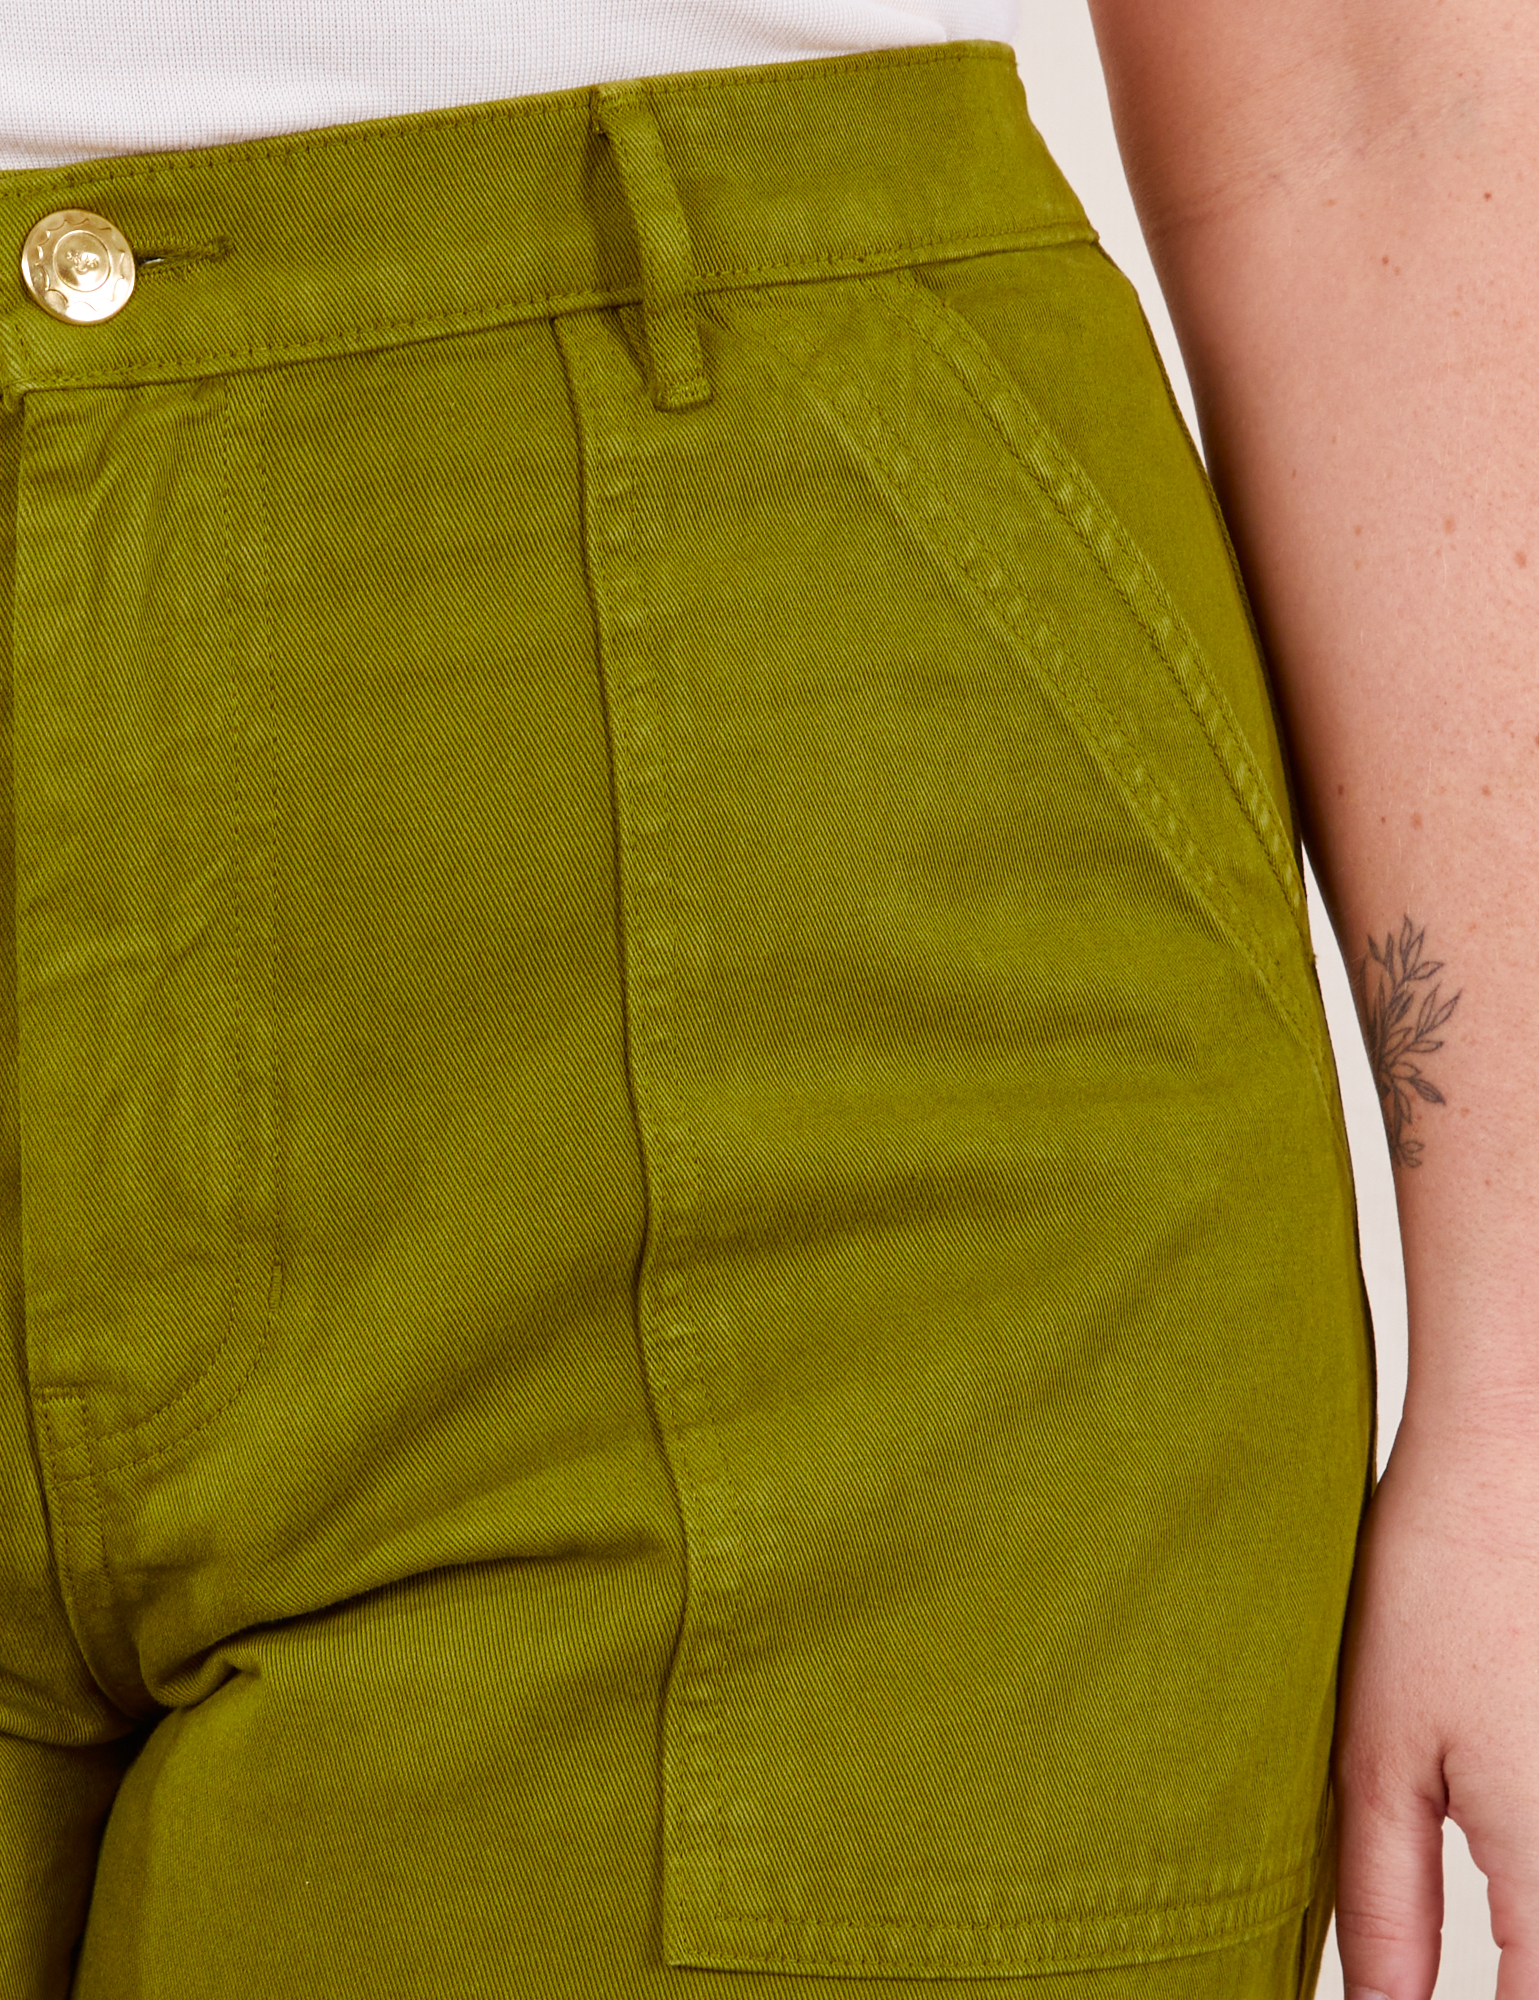 Work Pants in Olive Green front pocket close up on Faye